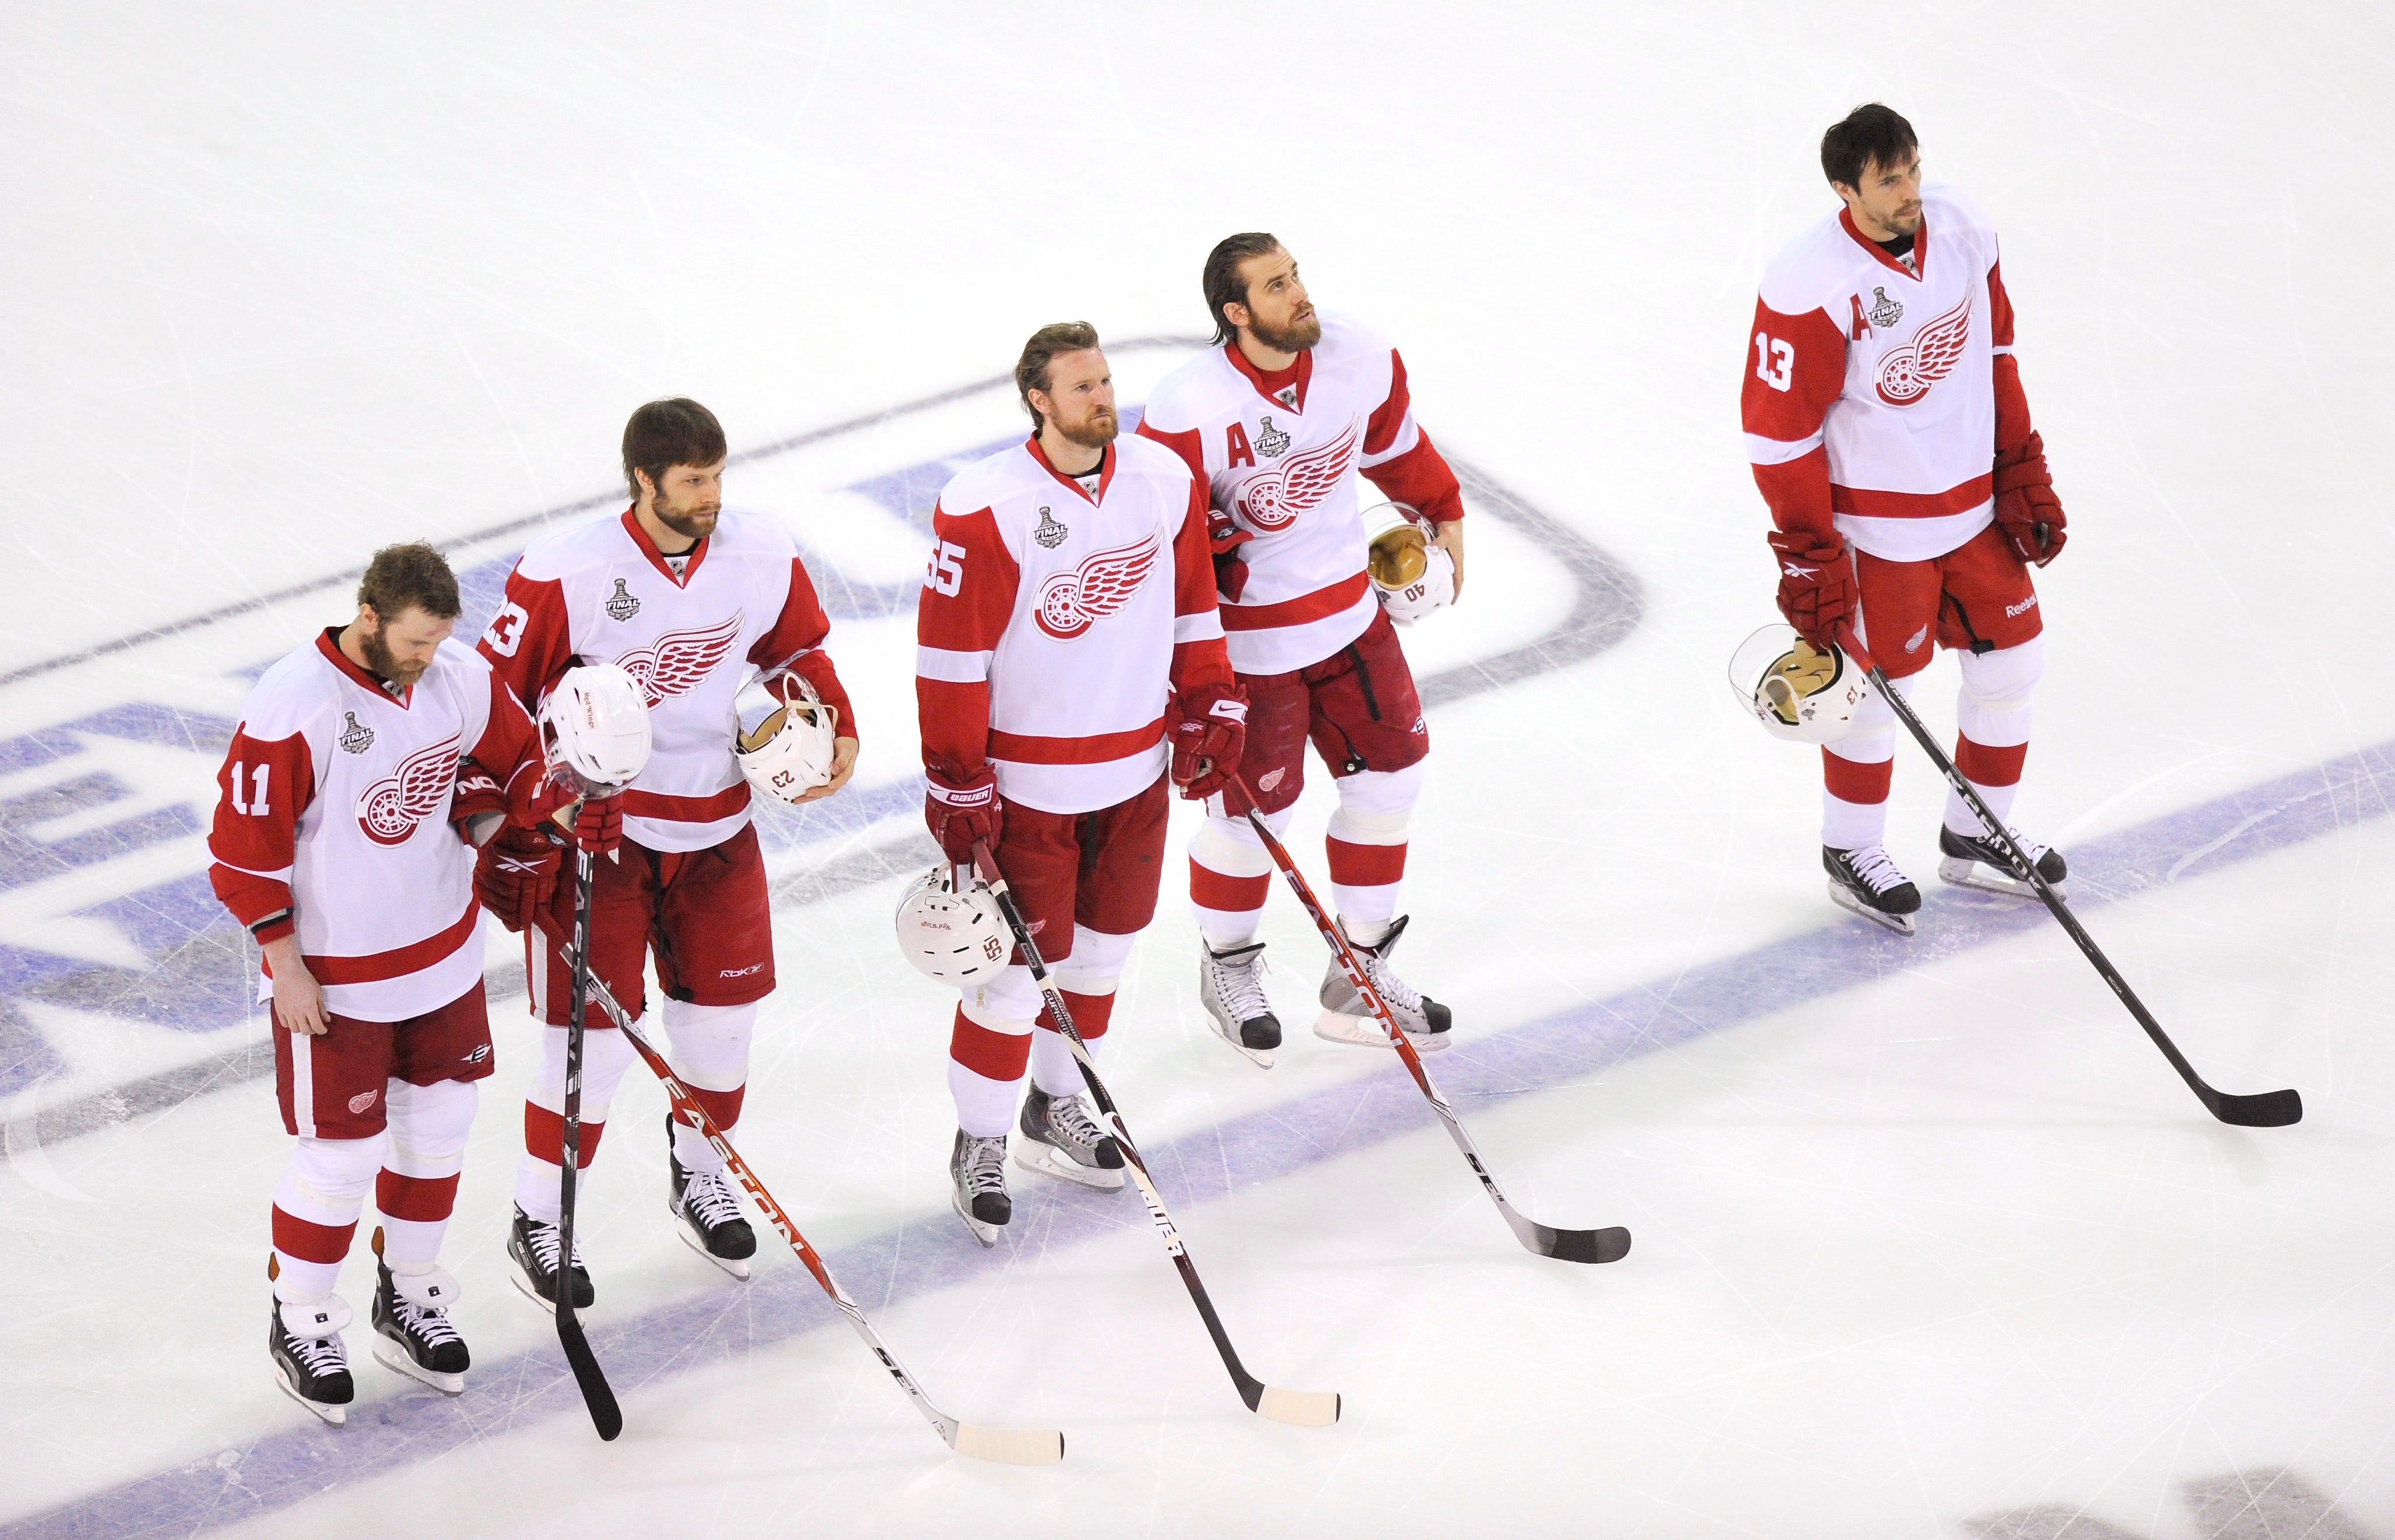 From left, Detroit Red Wings ' Daniel Cleary, Brad Stuart, Niklas Kronwall, Henrik Zetterberg and Pavel Datsyuk stand for the national anthem during the pregame of a Stanley Cup Finals game in Pittsburgh on June 9, 2009.